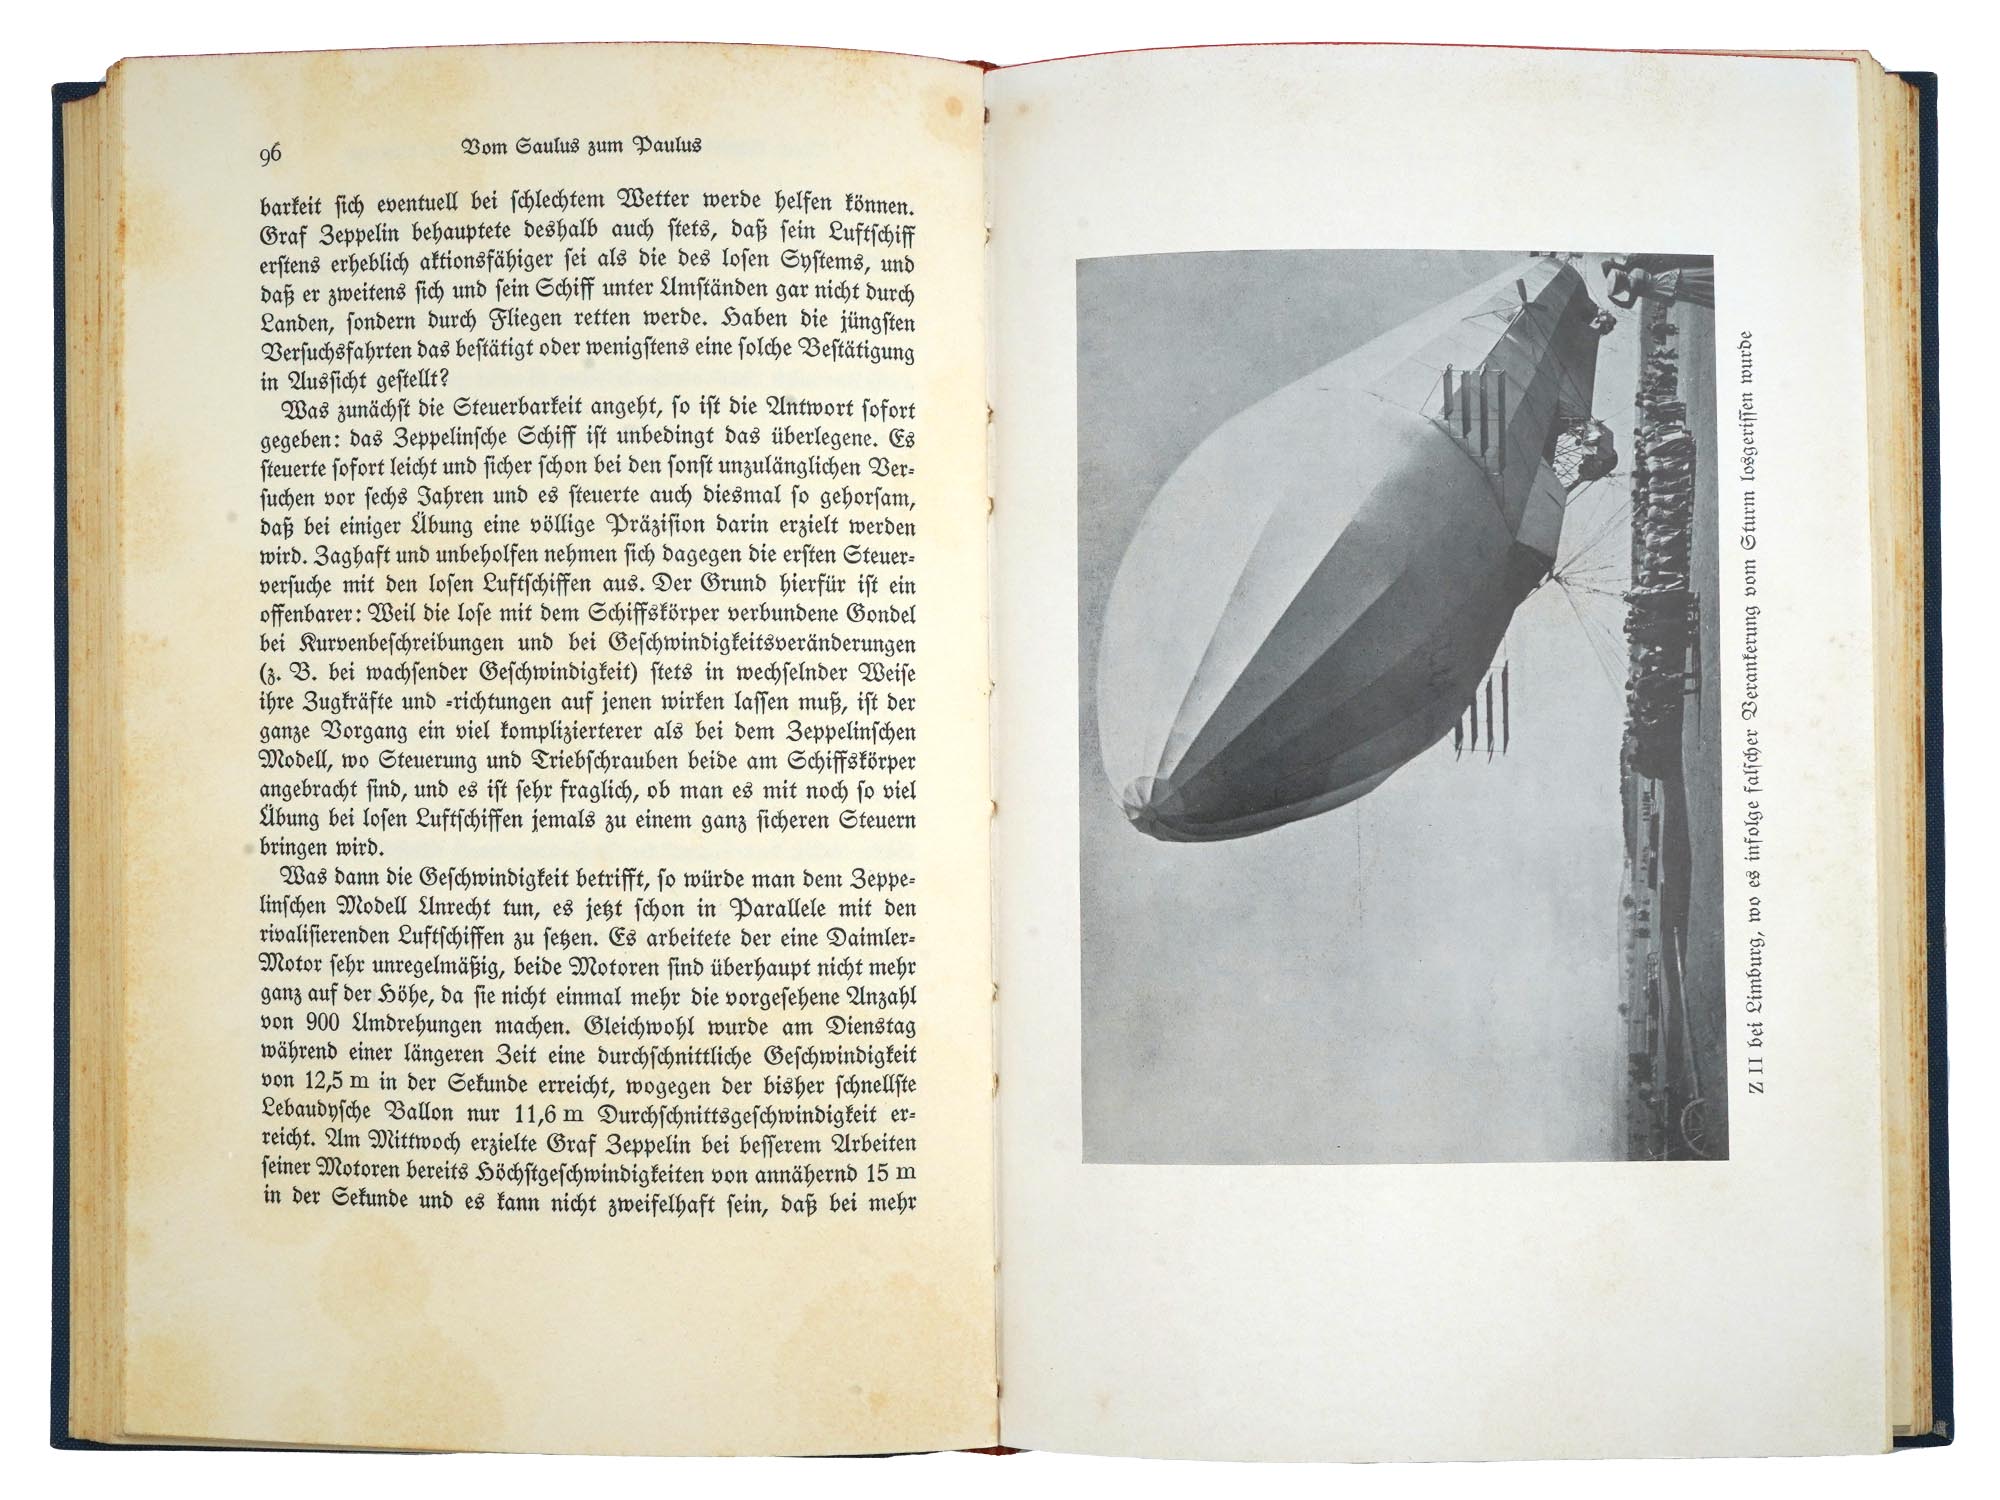 ZEPPELIN BOOK FROM ADOLF HITLERS PERSONAL LIBRARY PIC-6